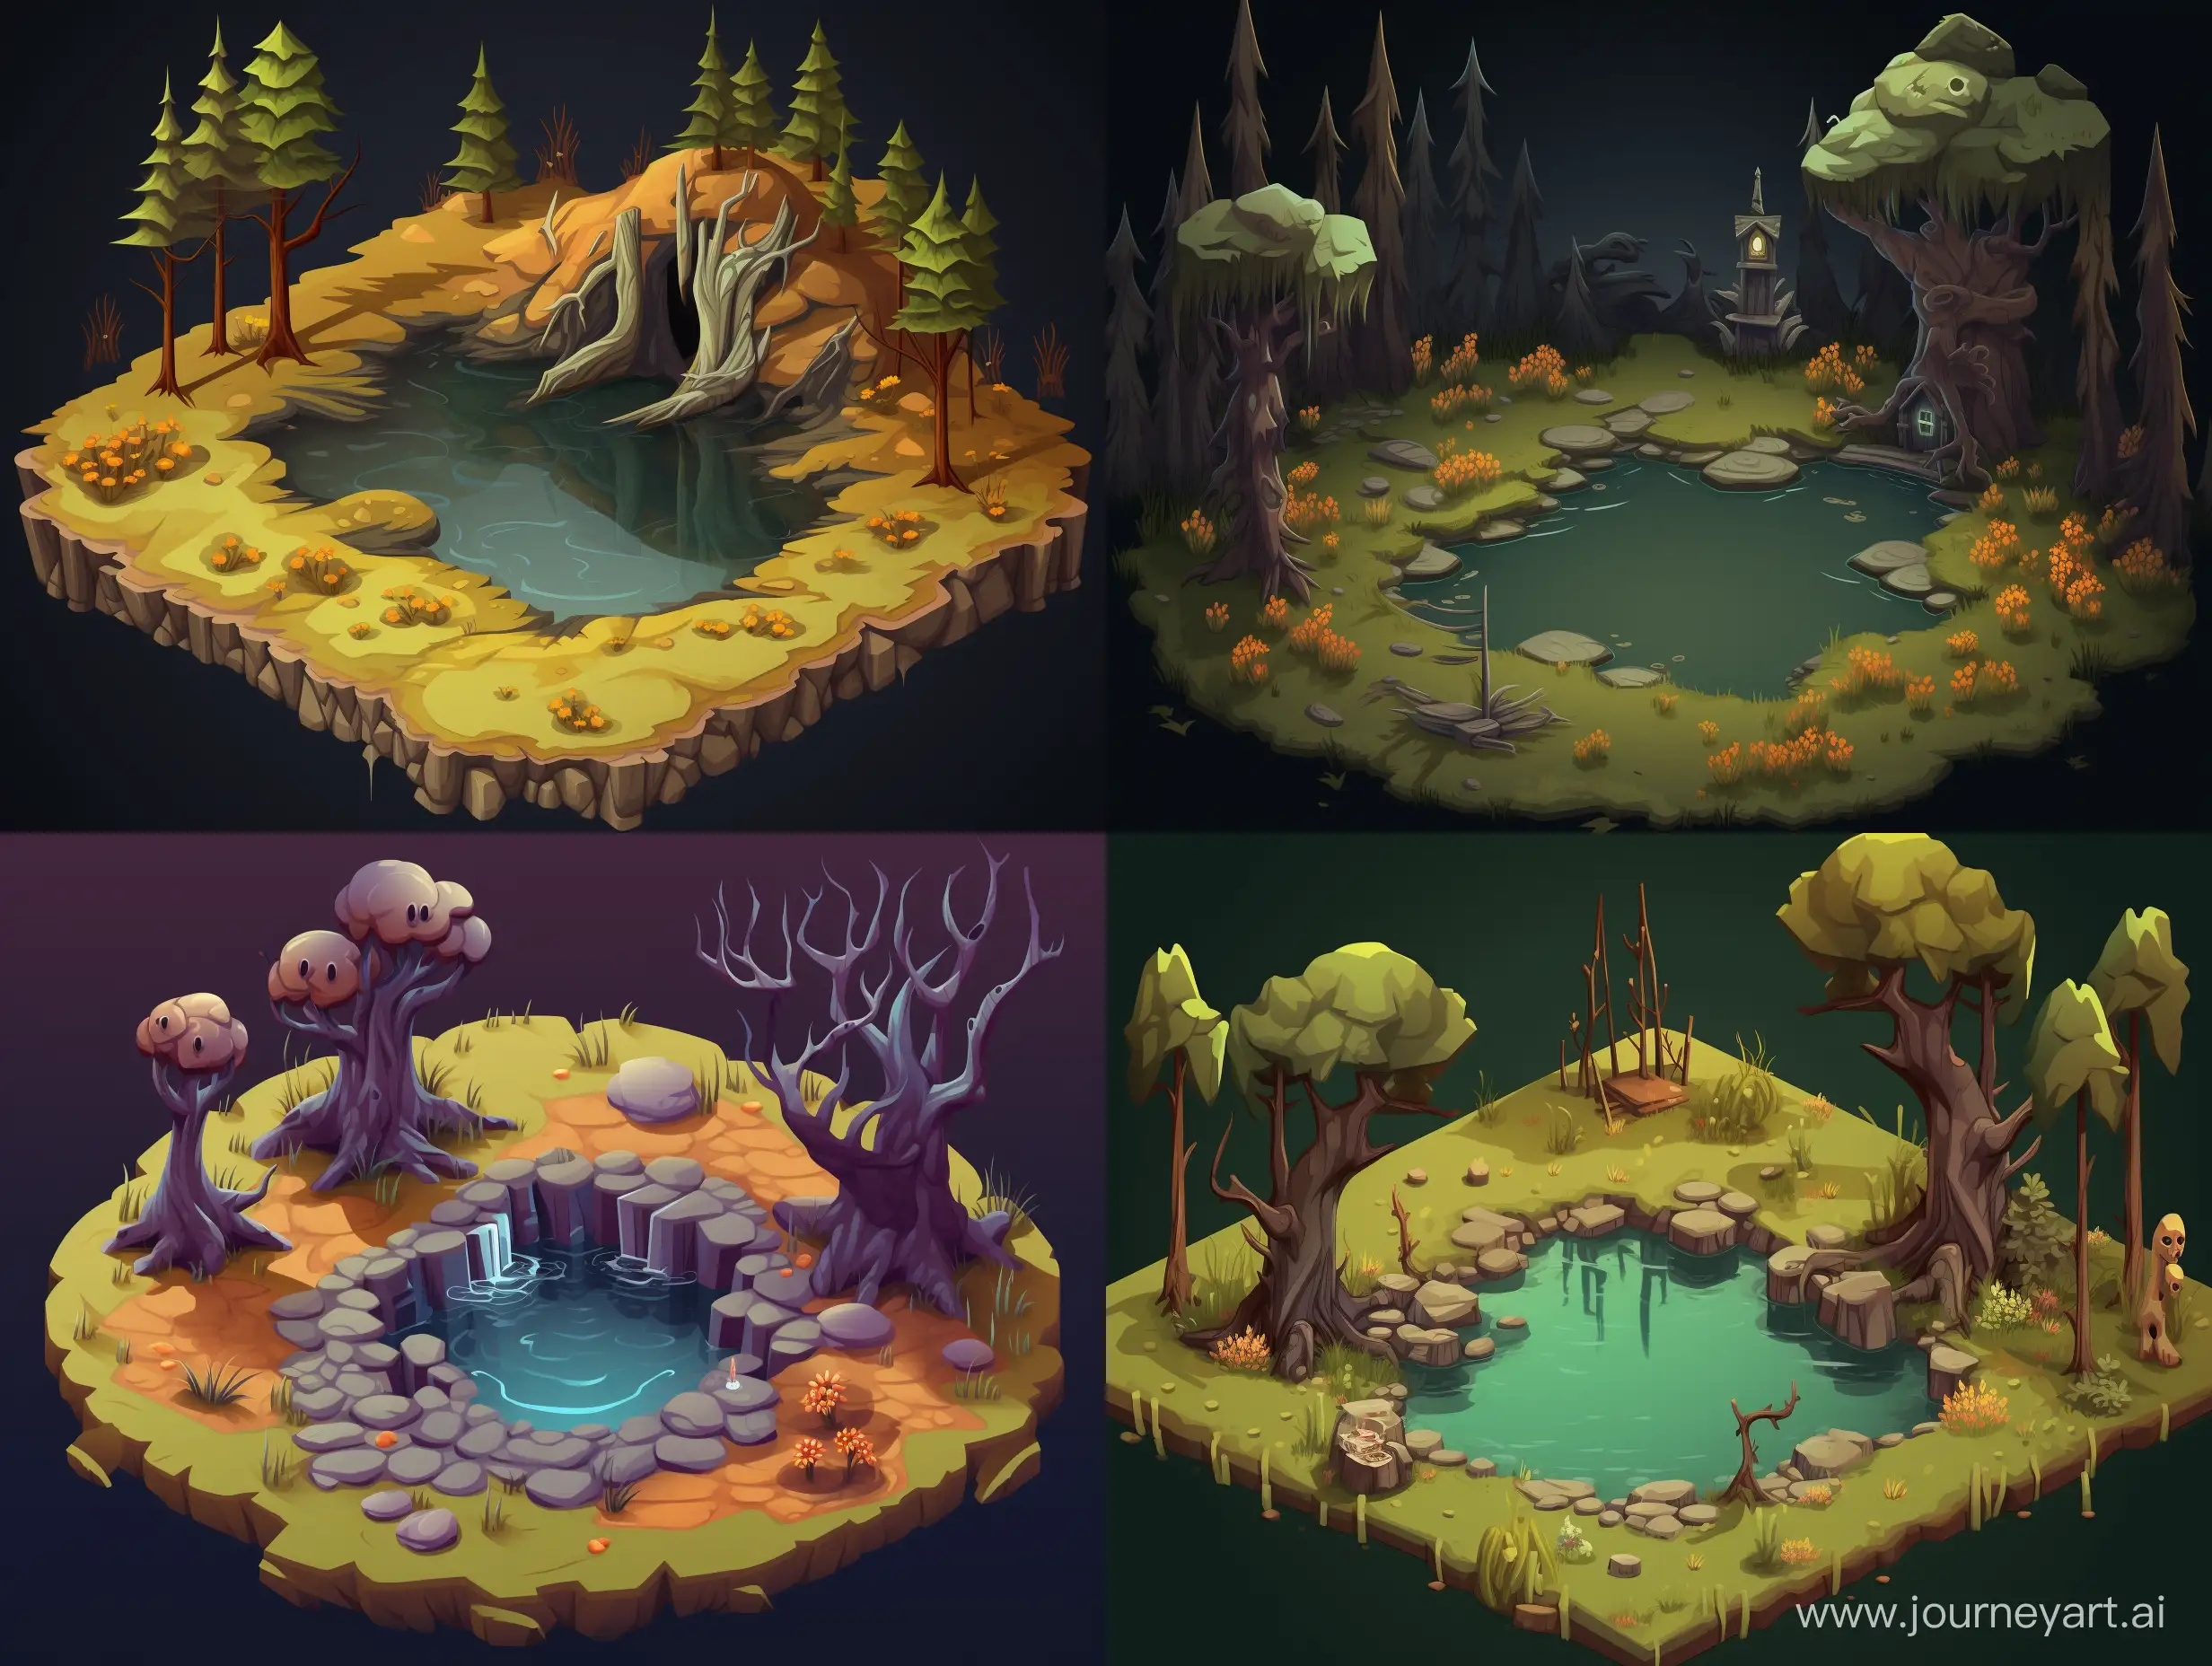 Spooky-Isometric-Halloween-Scene-with-Living-Tree-by-Small-Pond